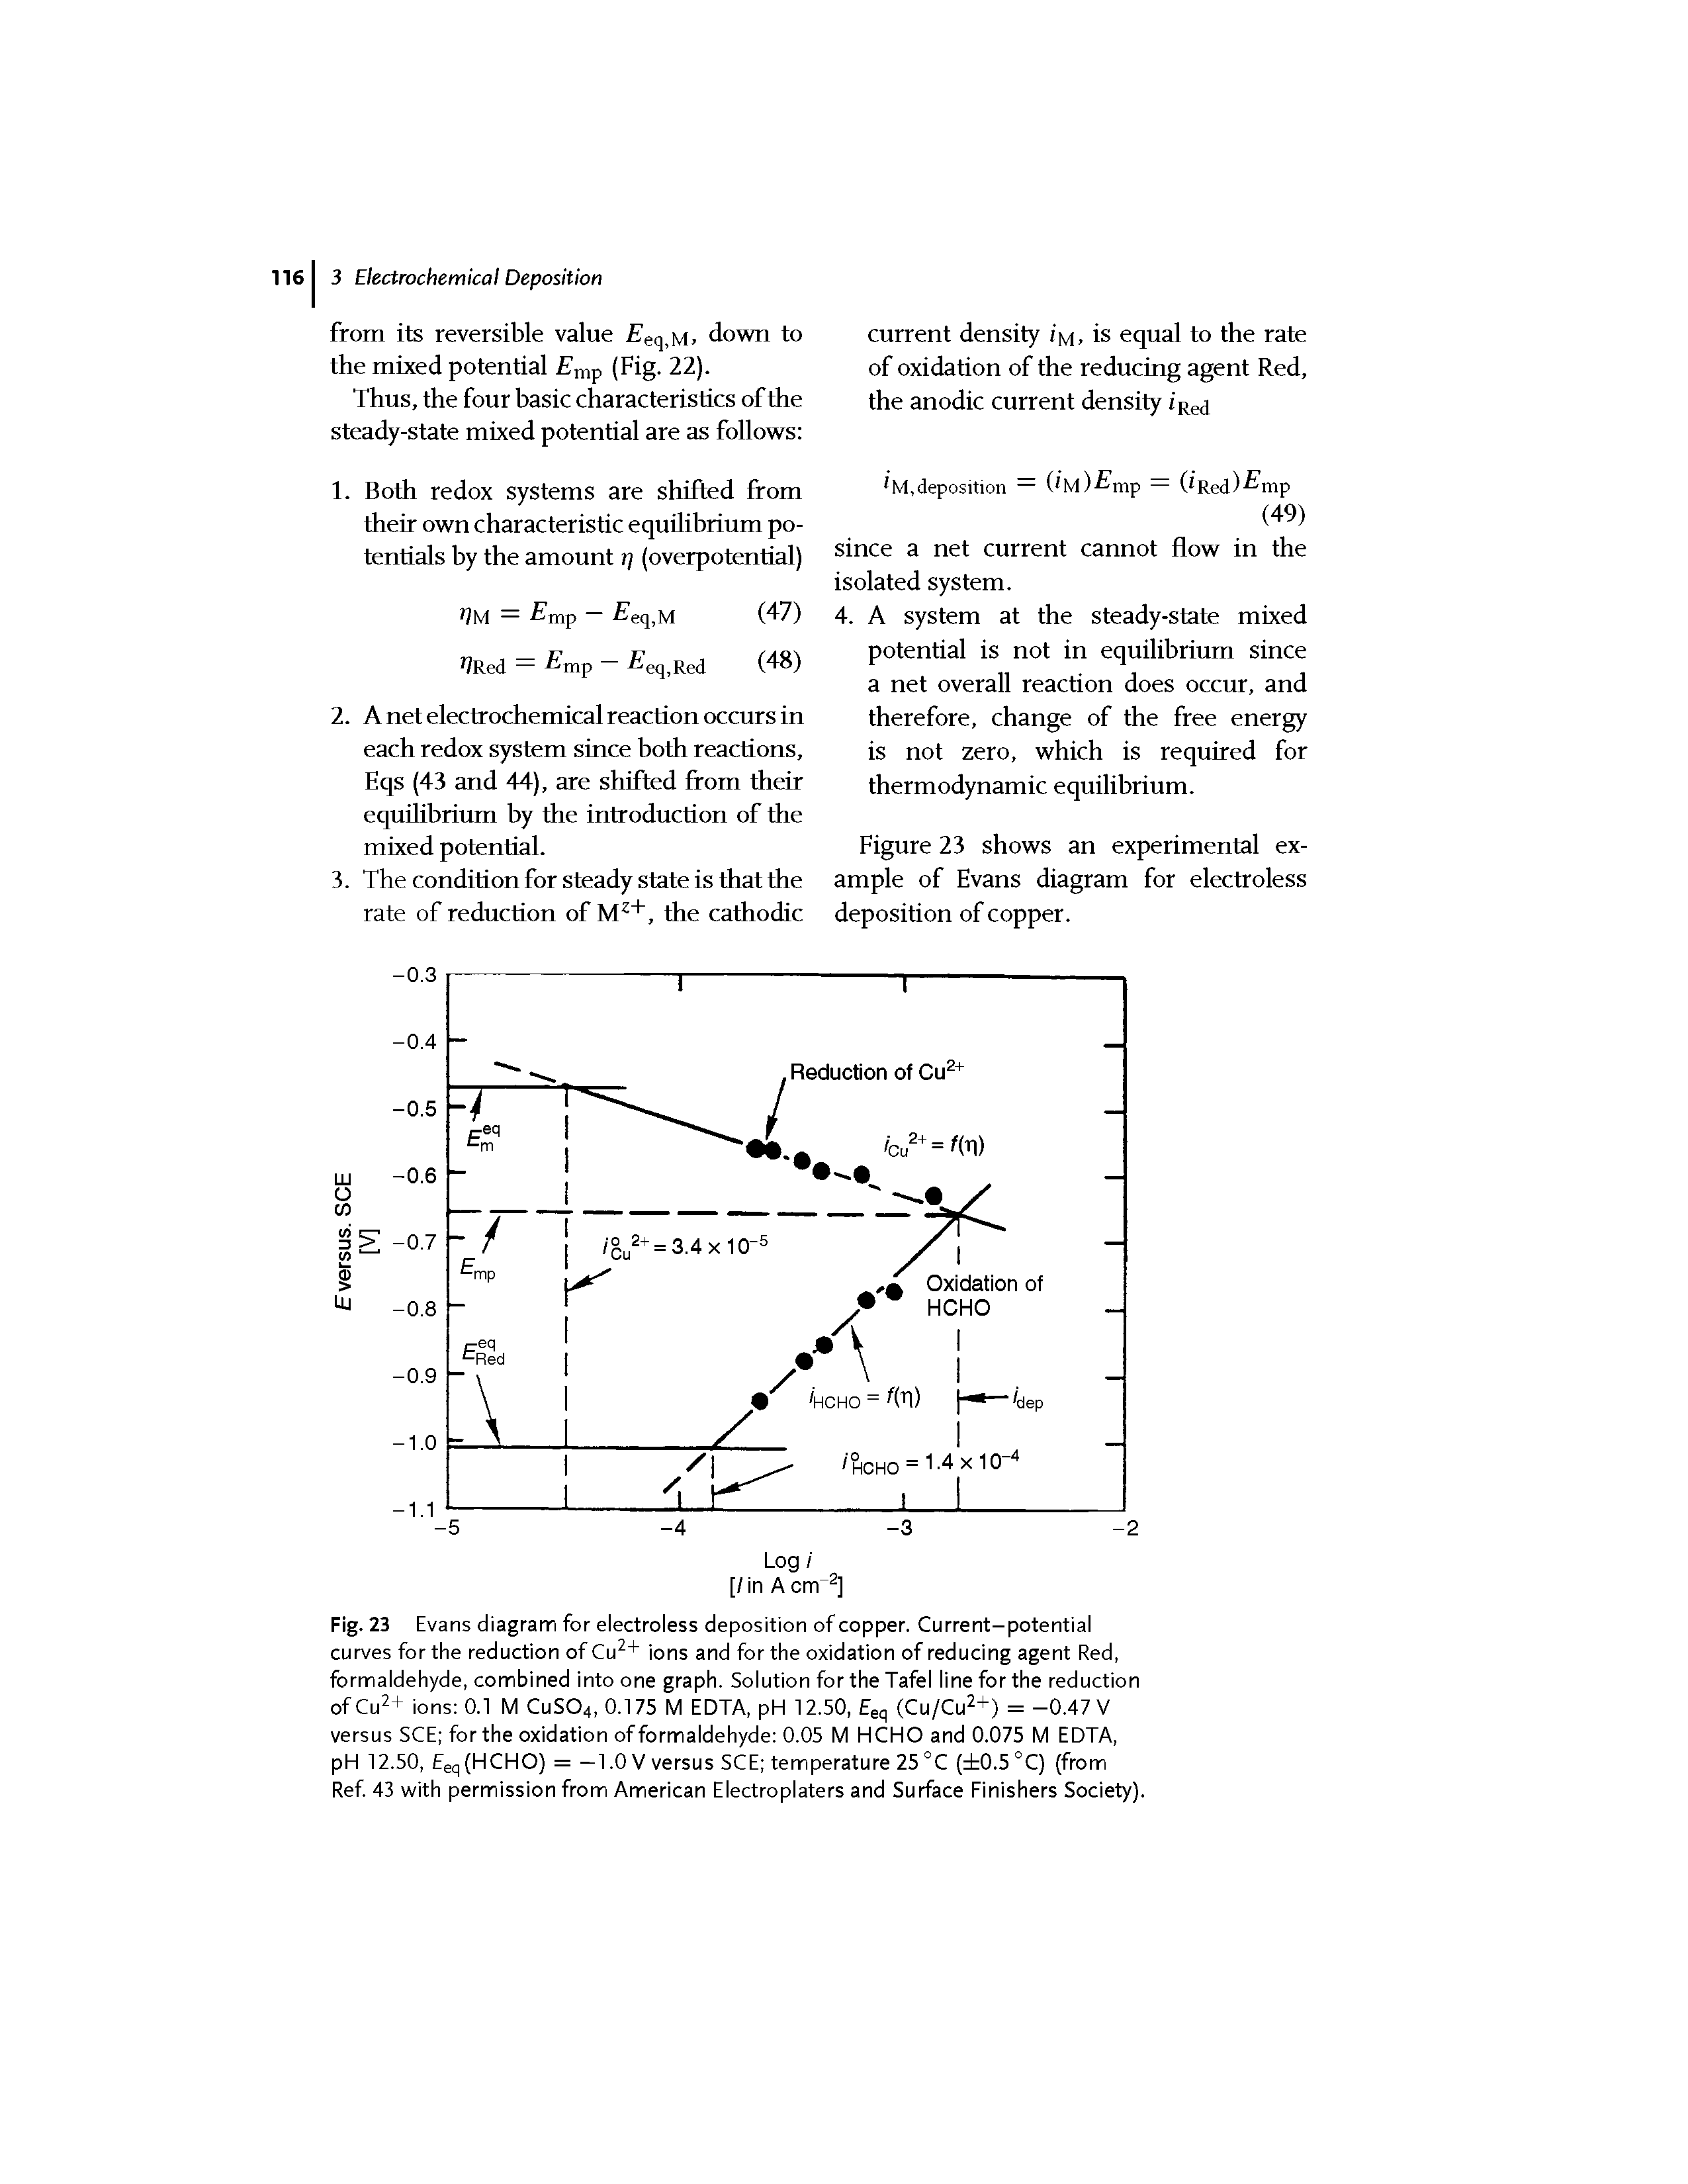 Fig. 23 Evans diagram for electroless deposition of copper. Current-potential curves for the reduction of Cu2+ ions and for the oxidation of reducing agent Red, formaldehyde, combined into one graph. Solution for the Tafel line for the reduction of Cu2+ ions 0.1 M CuS04, 0.175 M EDTA, pH 12.50, Eeq (Cu/Cu2+) = -0.47 V versus SCE for the oxidation of formaldehyde 0.05 M HCHO and 0.075 M EDTA, pH 12.50, Eeq(HCHO) = —1.0 V versus SCE temperature 25°C ( 0.5°C) (from Ref. 43 with permission from American Electroplaters and Surface Finishers Society).